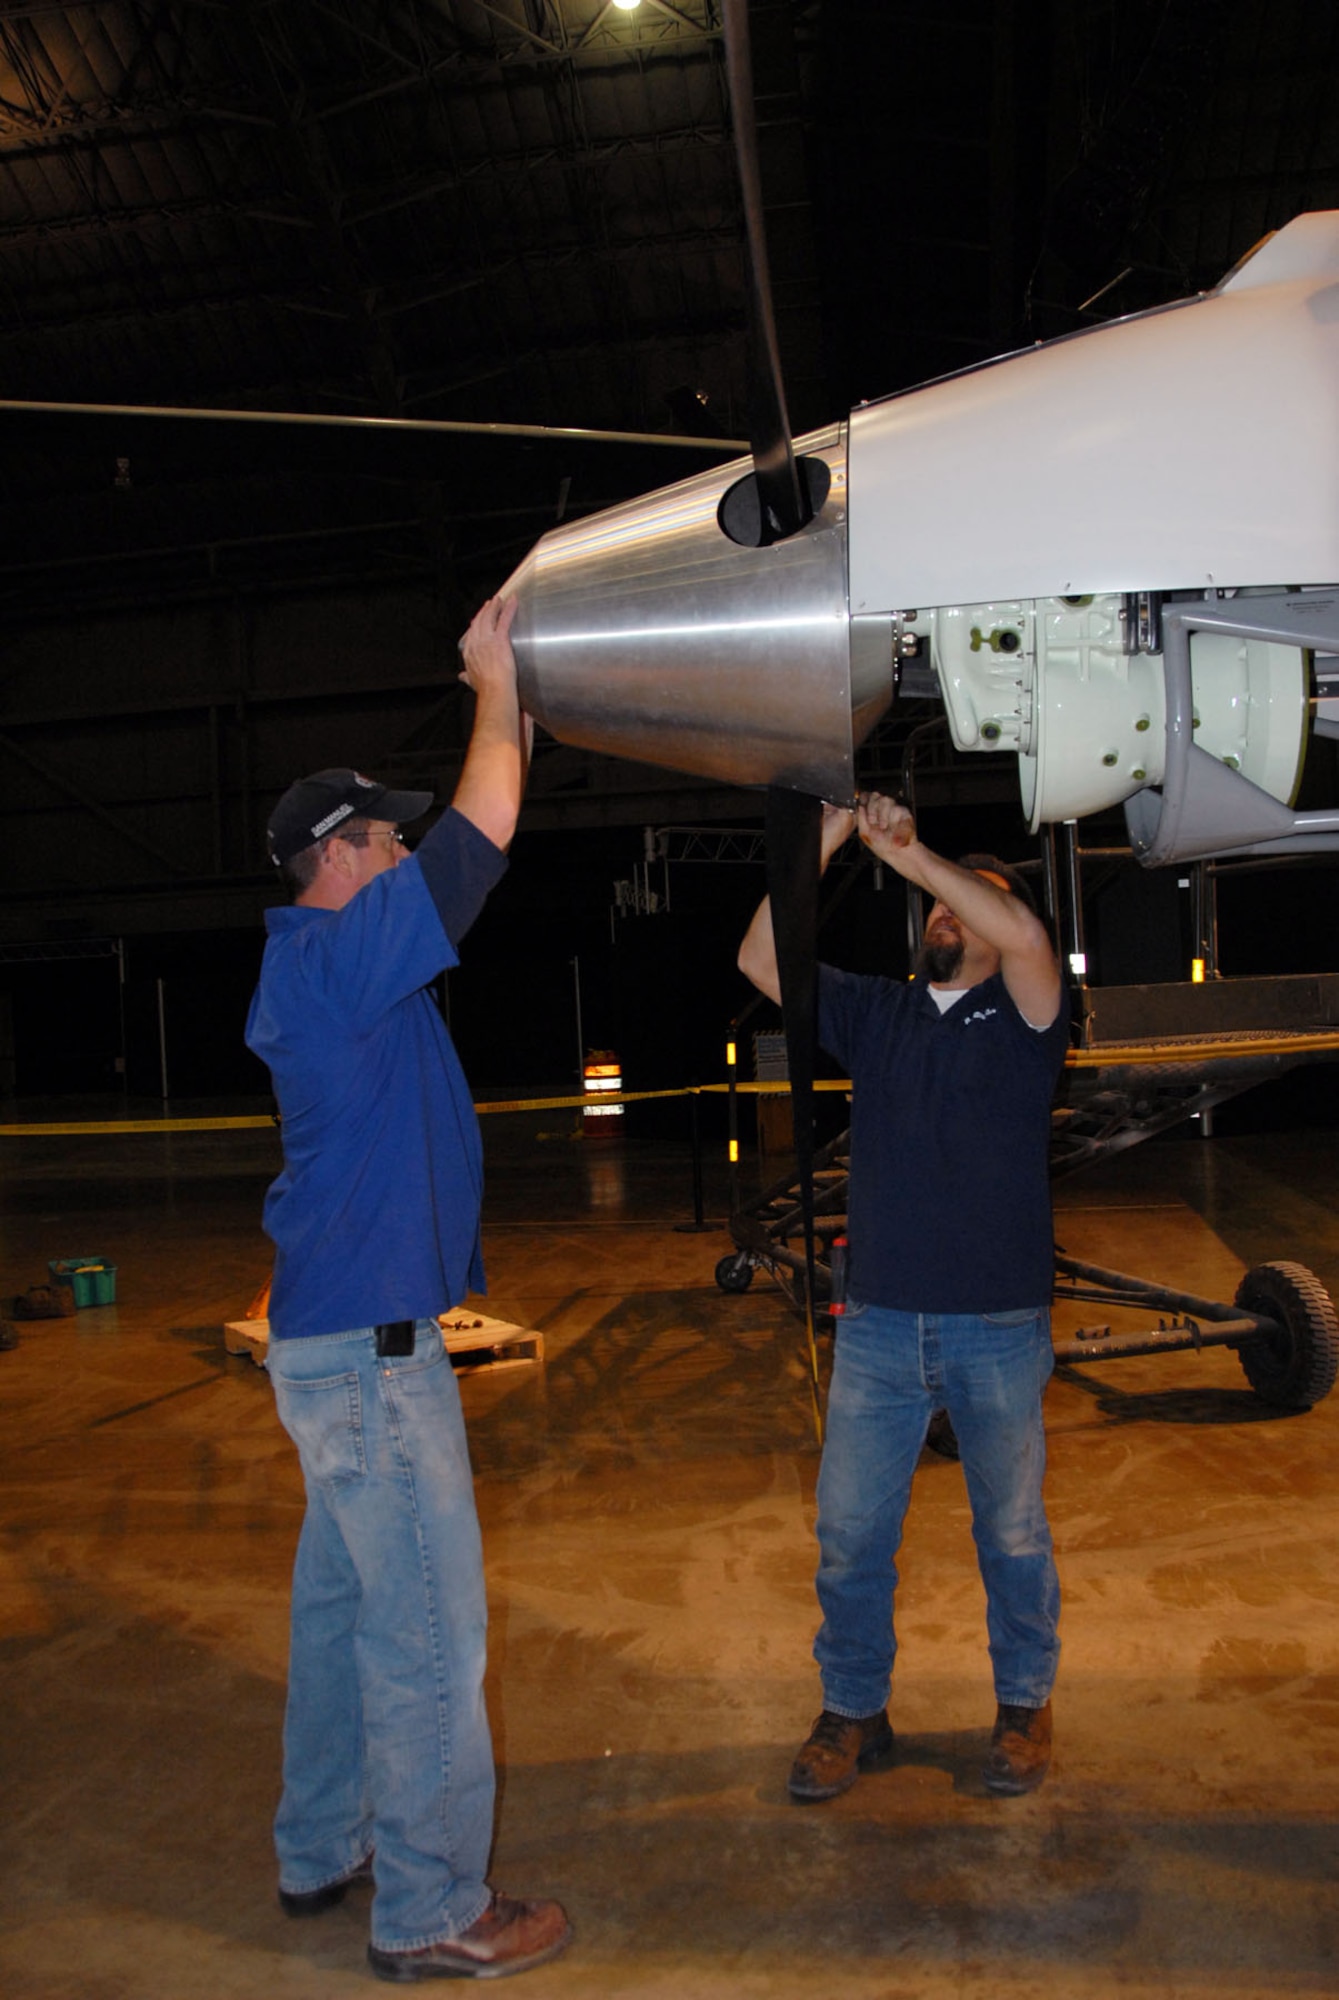 DAYTON, Ohio (01/2010) -- Restoration crews from General Atomics and the National Museum of the U.S. Air Force assemble the General Atomics YMQ-9 Reaper. (U.S. Air Force photo)